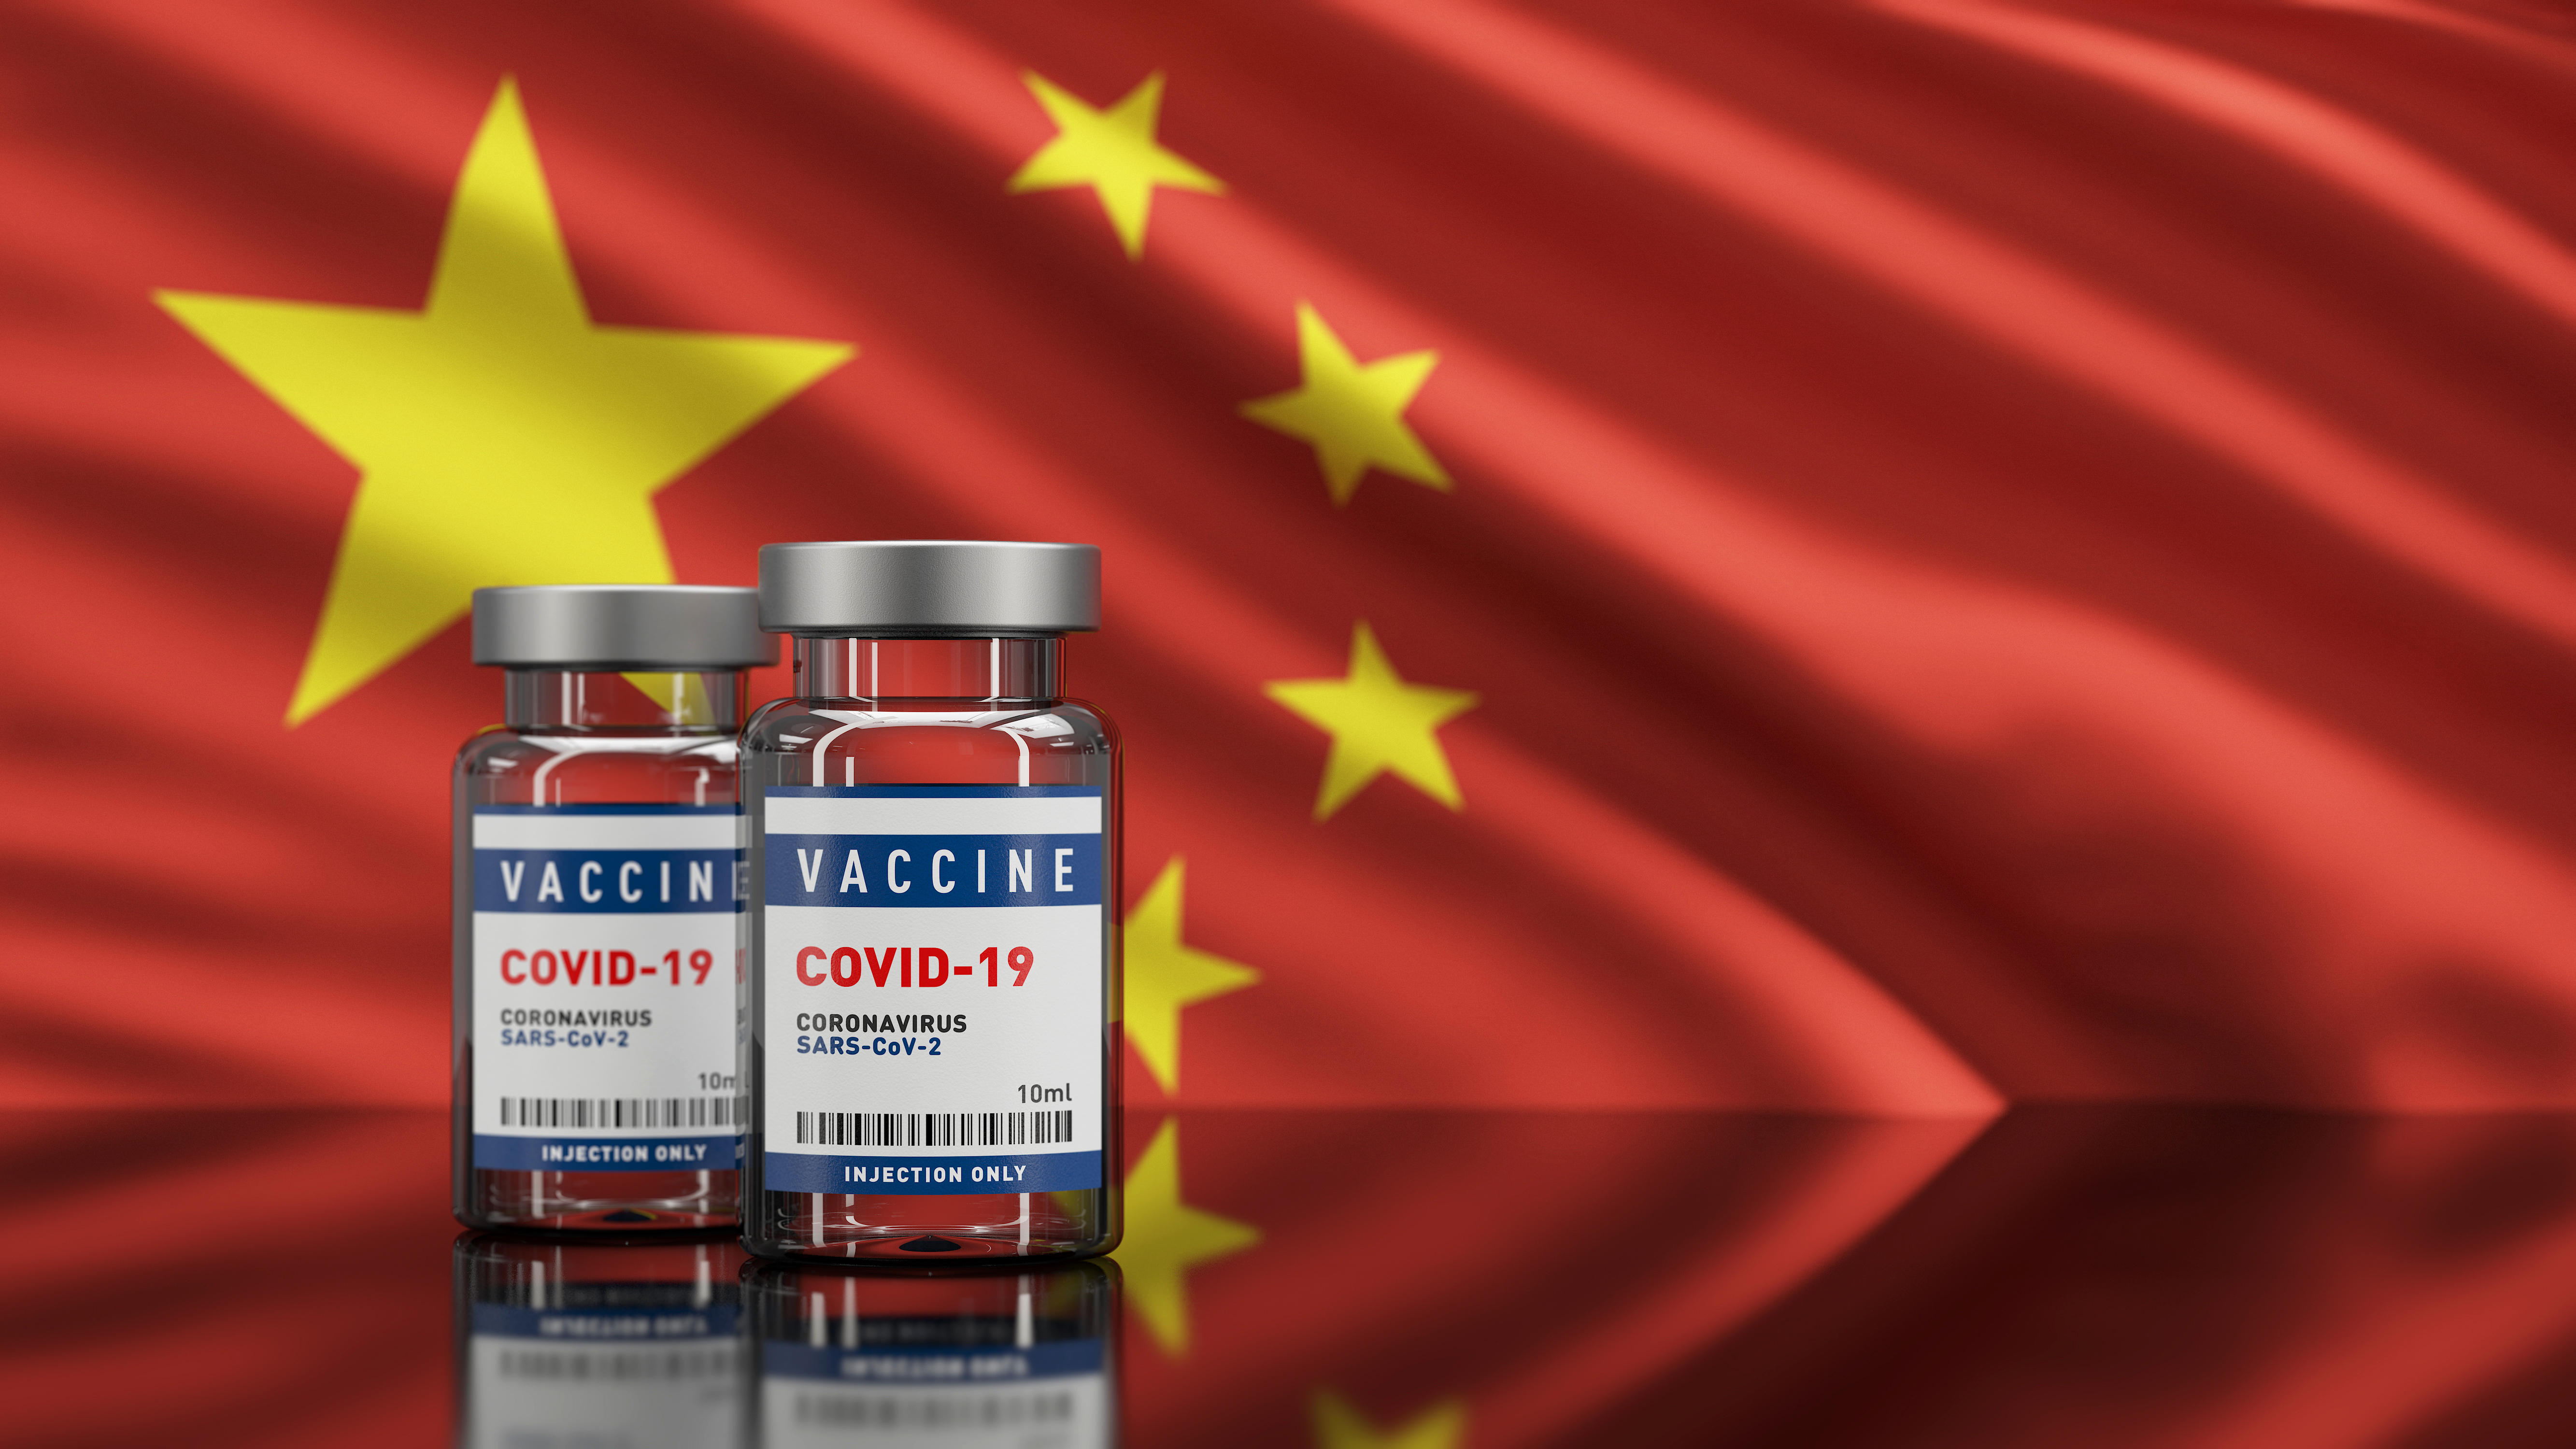 Photo showing two glass containers of COVID-19 vaccine with the Chinese flag in the background